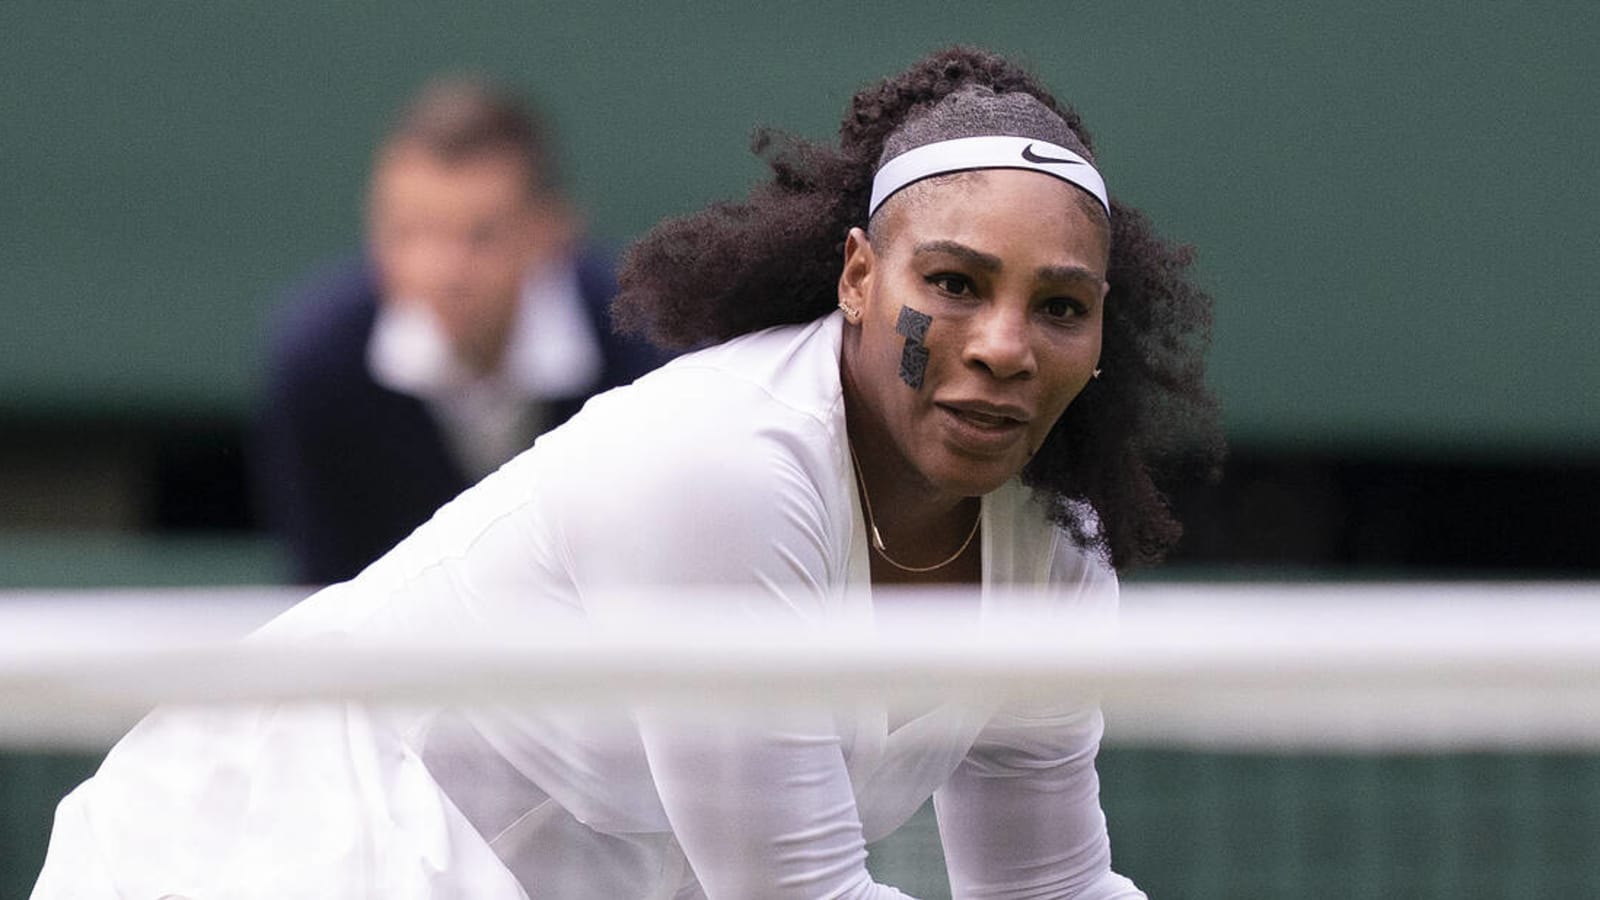 Serena Williams wears tape on her face during Wimbledon loss